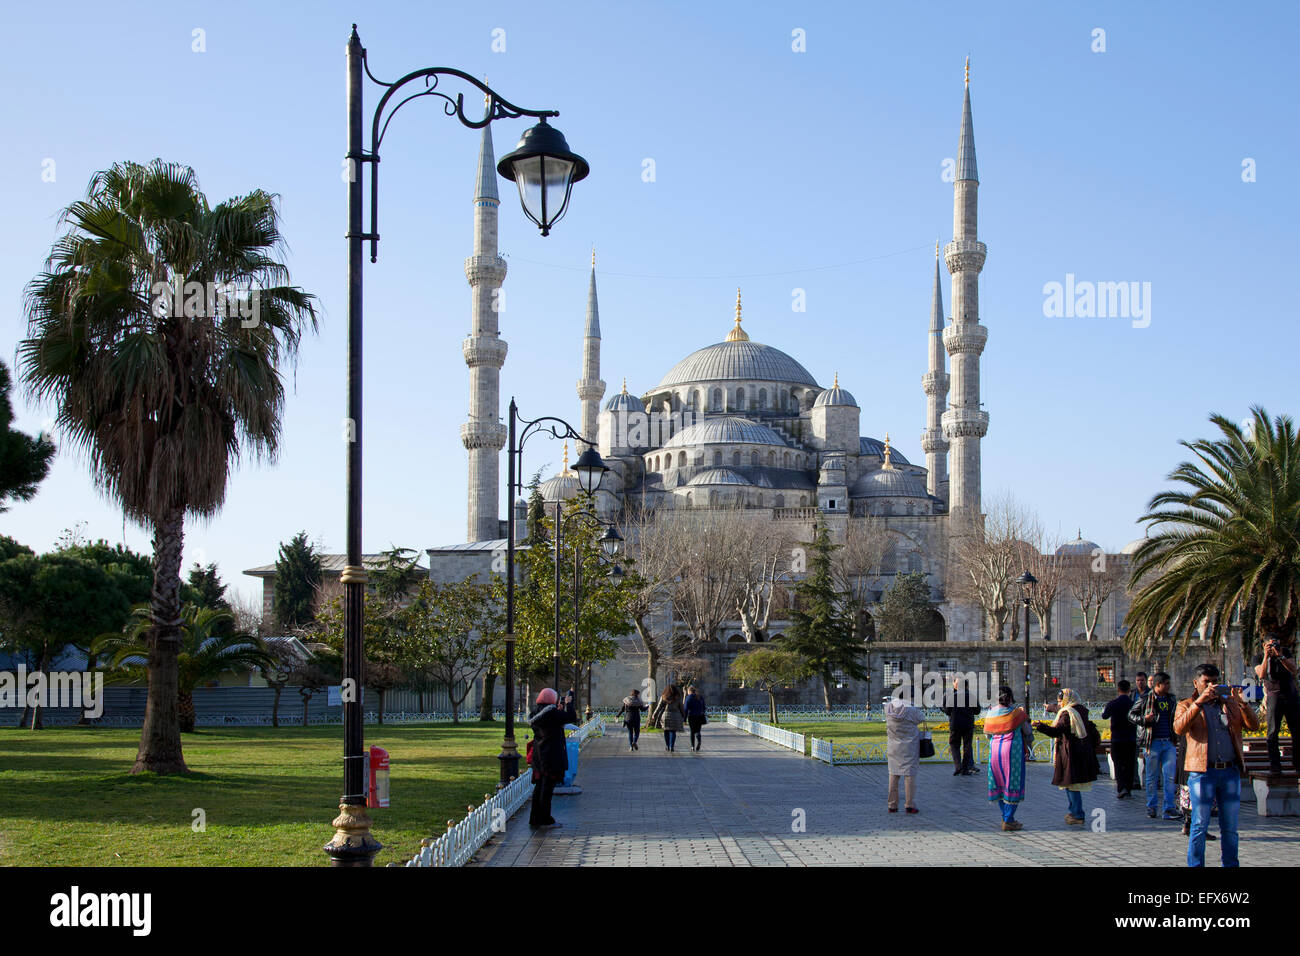 Blue Mosque with lamp and palm trees, from gardens, Sultanahmet